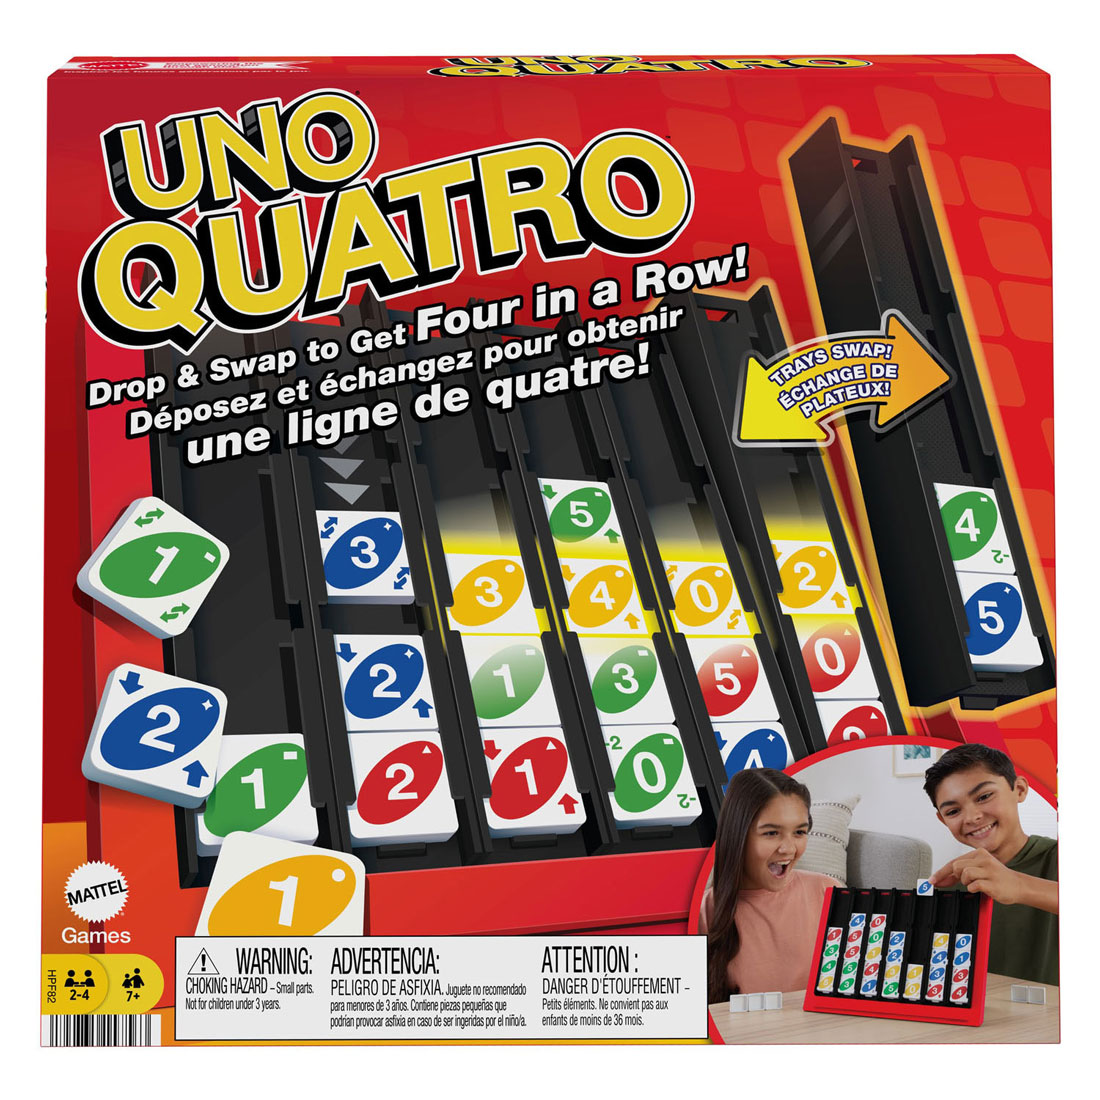 Blokus Shuffle - UNO edition in 2023